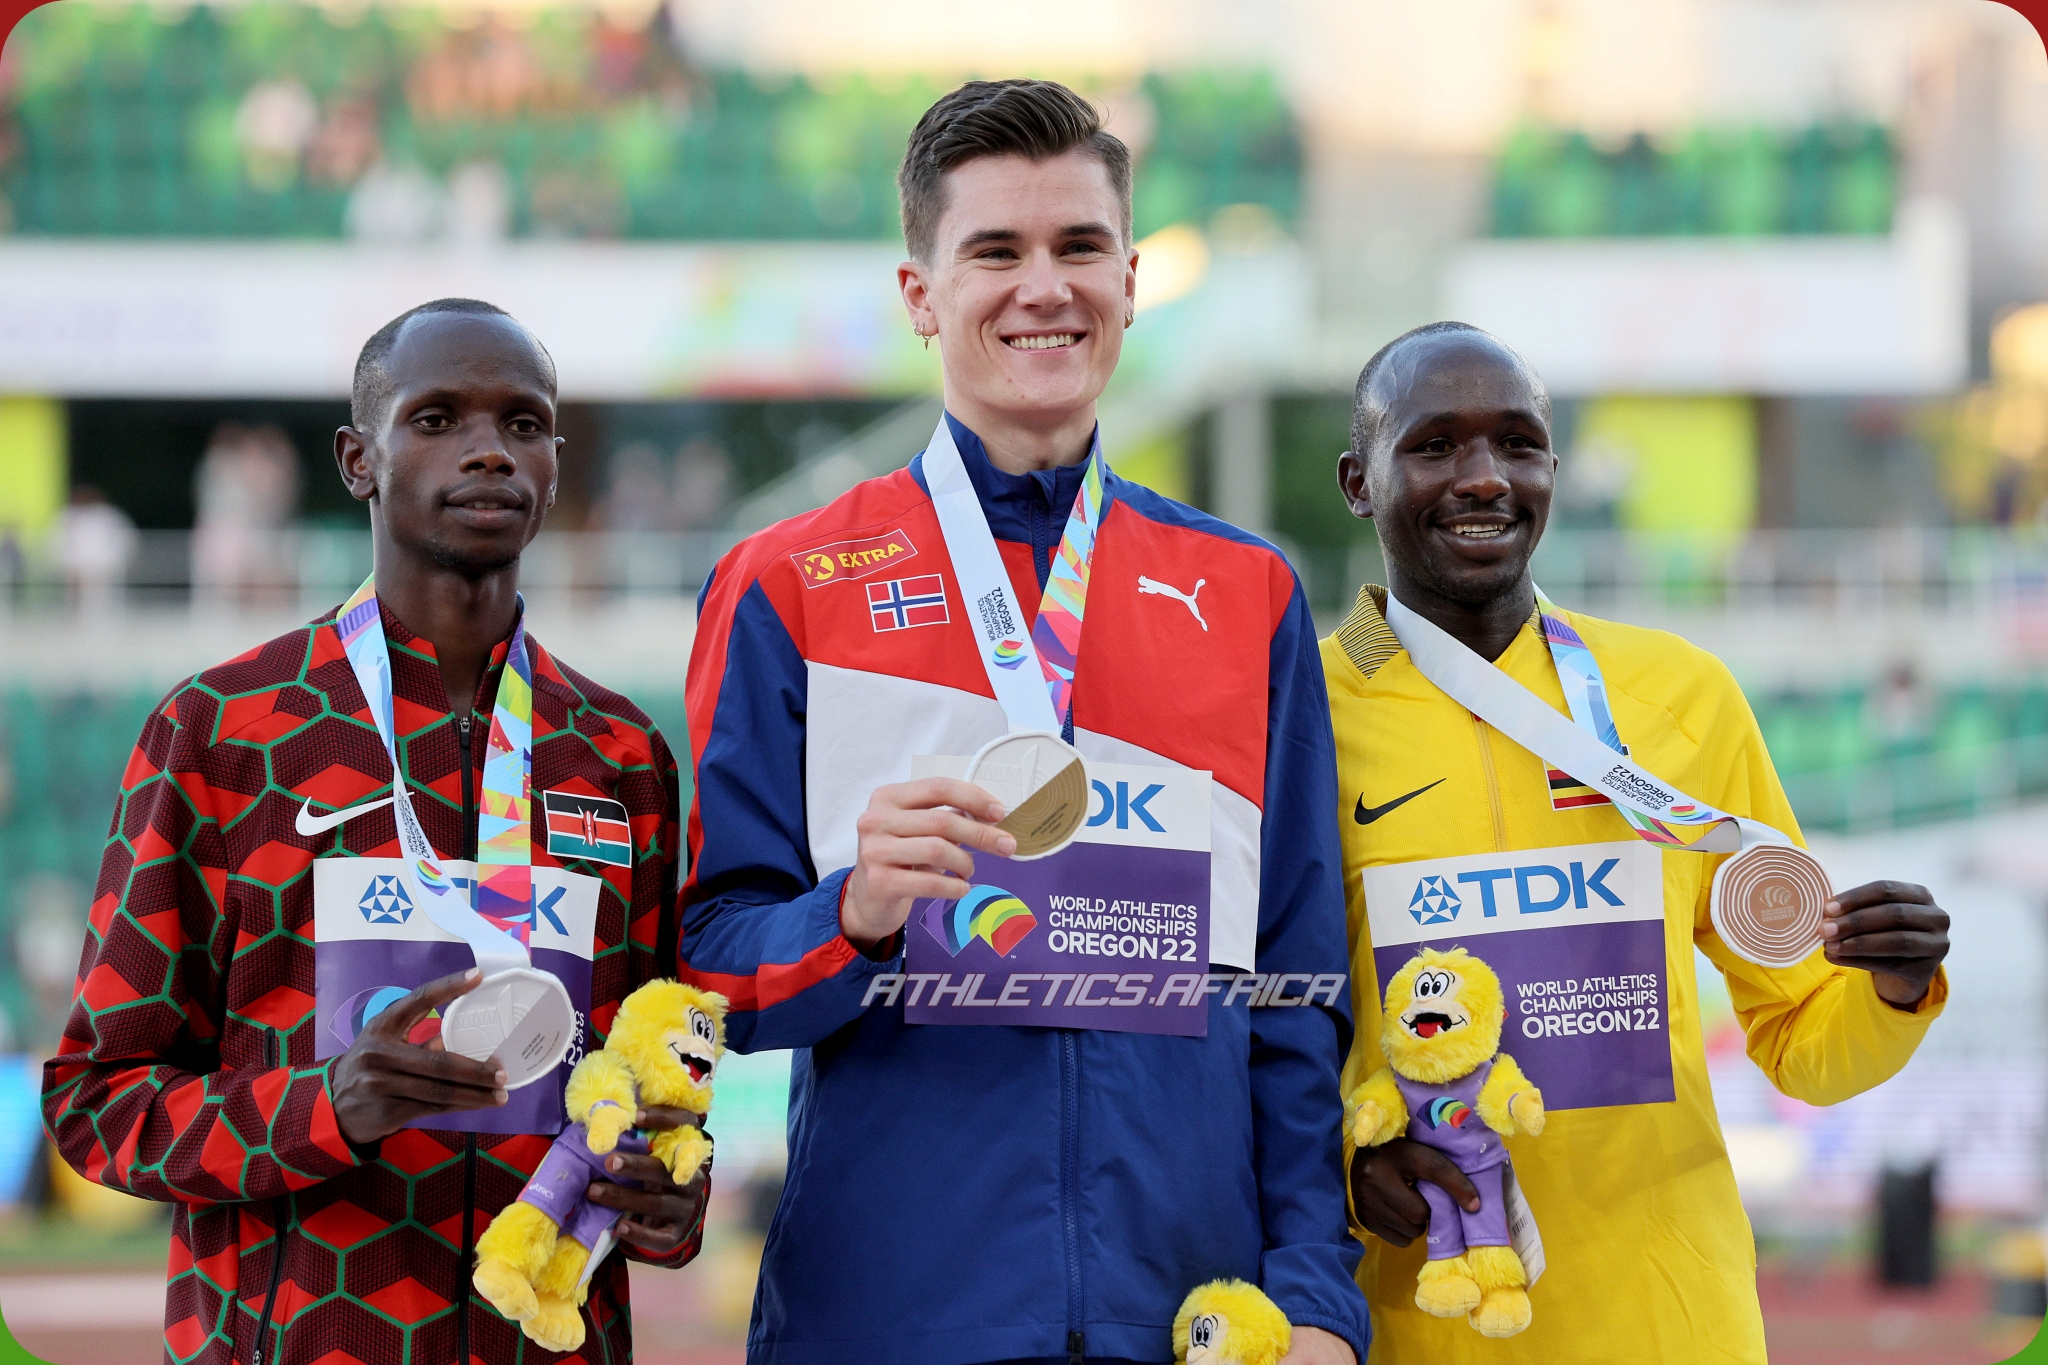 Silver medalist Jacob Krop of Team Kenya, gold medalist Jakob Ingebrigtsen of Team Norway, and bronze medalist Oscar Chelimo of Team Uganda pose during the medal ceremony for the Men's 5000m Final on day ten of the World Athletics Championships Oregon22 at Hayward Field on July 24, 2022 in Eugene, Oregon. (Photo by Andy Lyons/Getty Images for World Athletics)